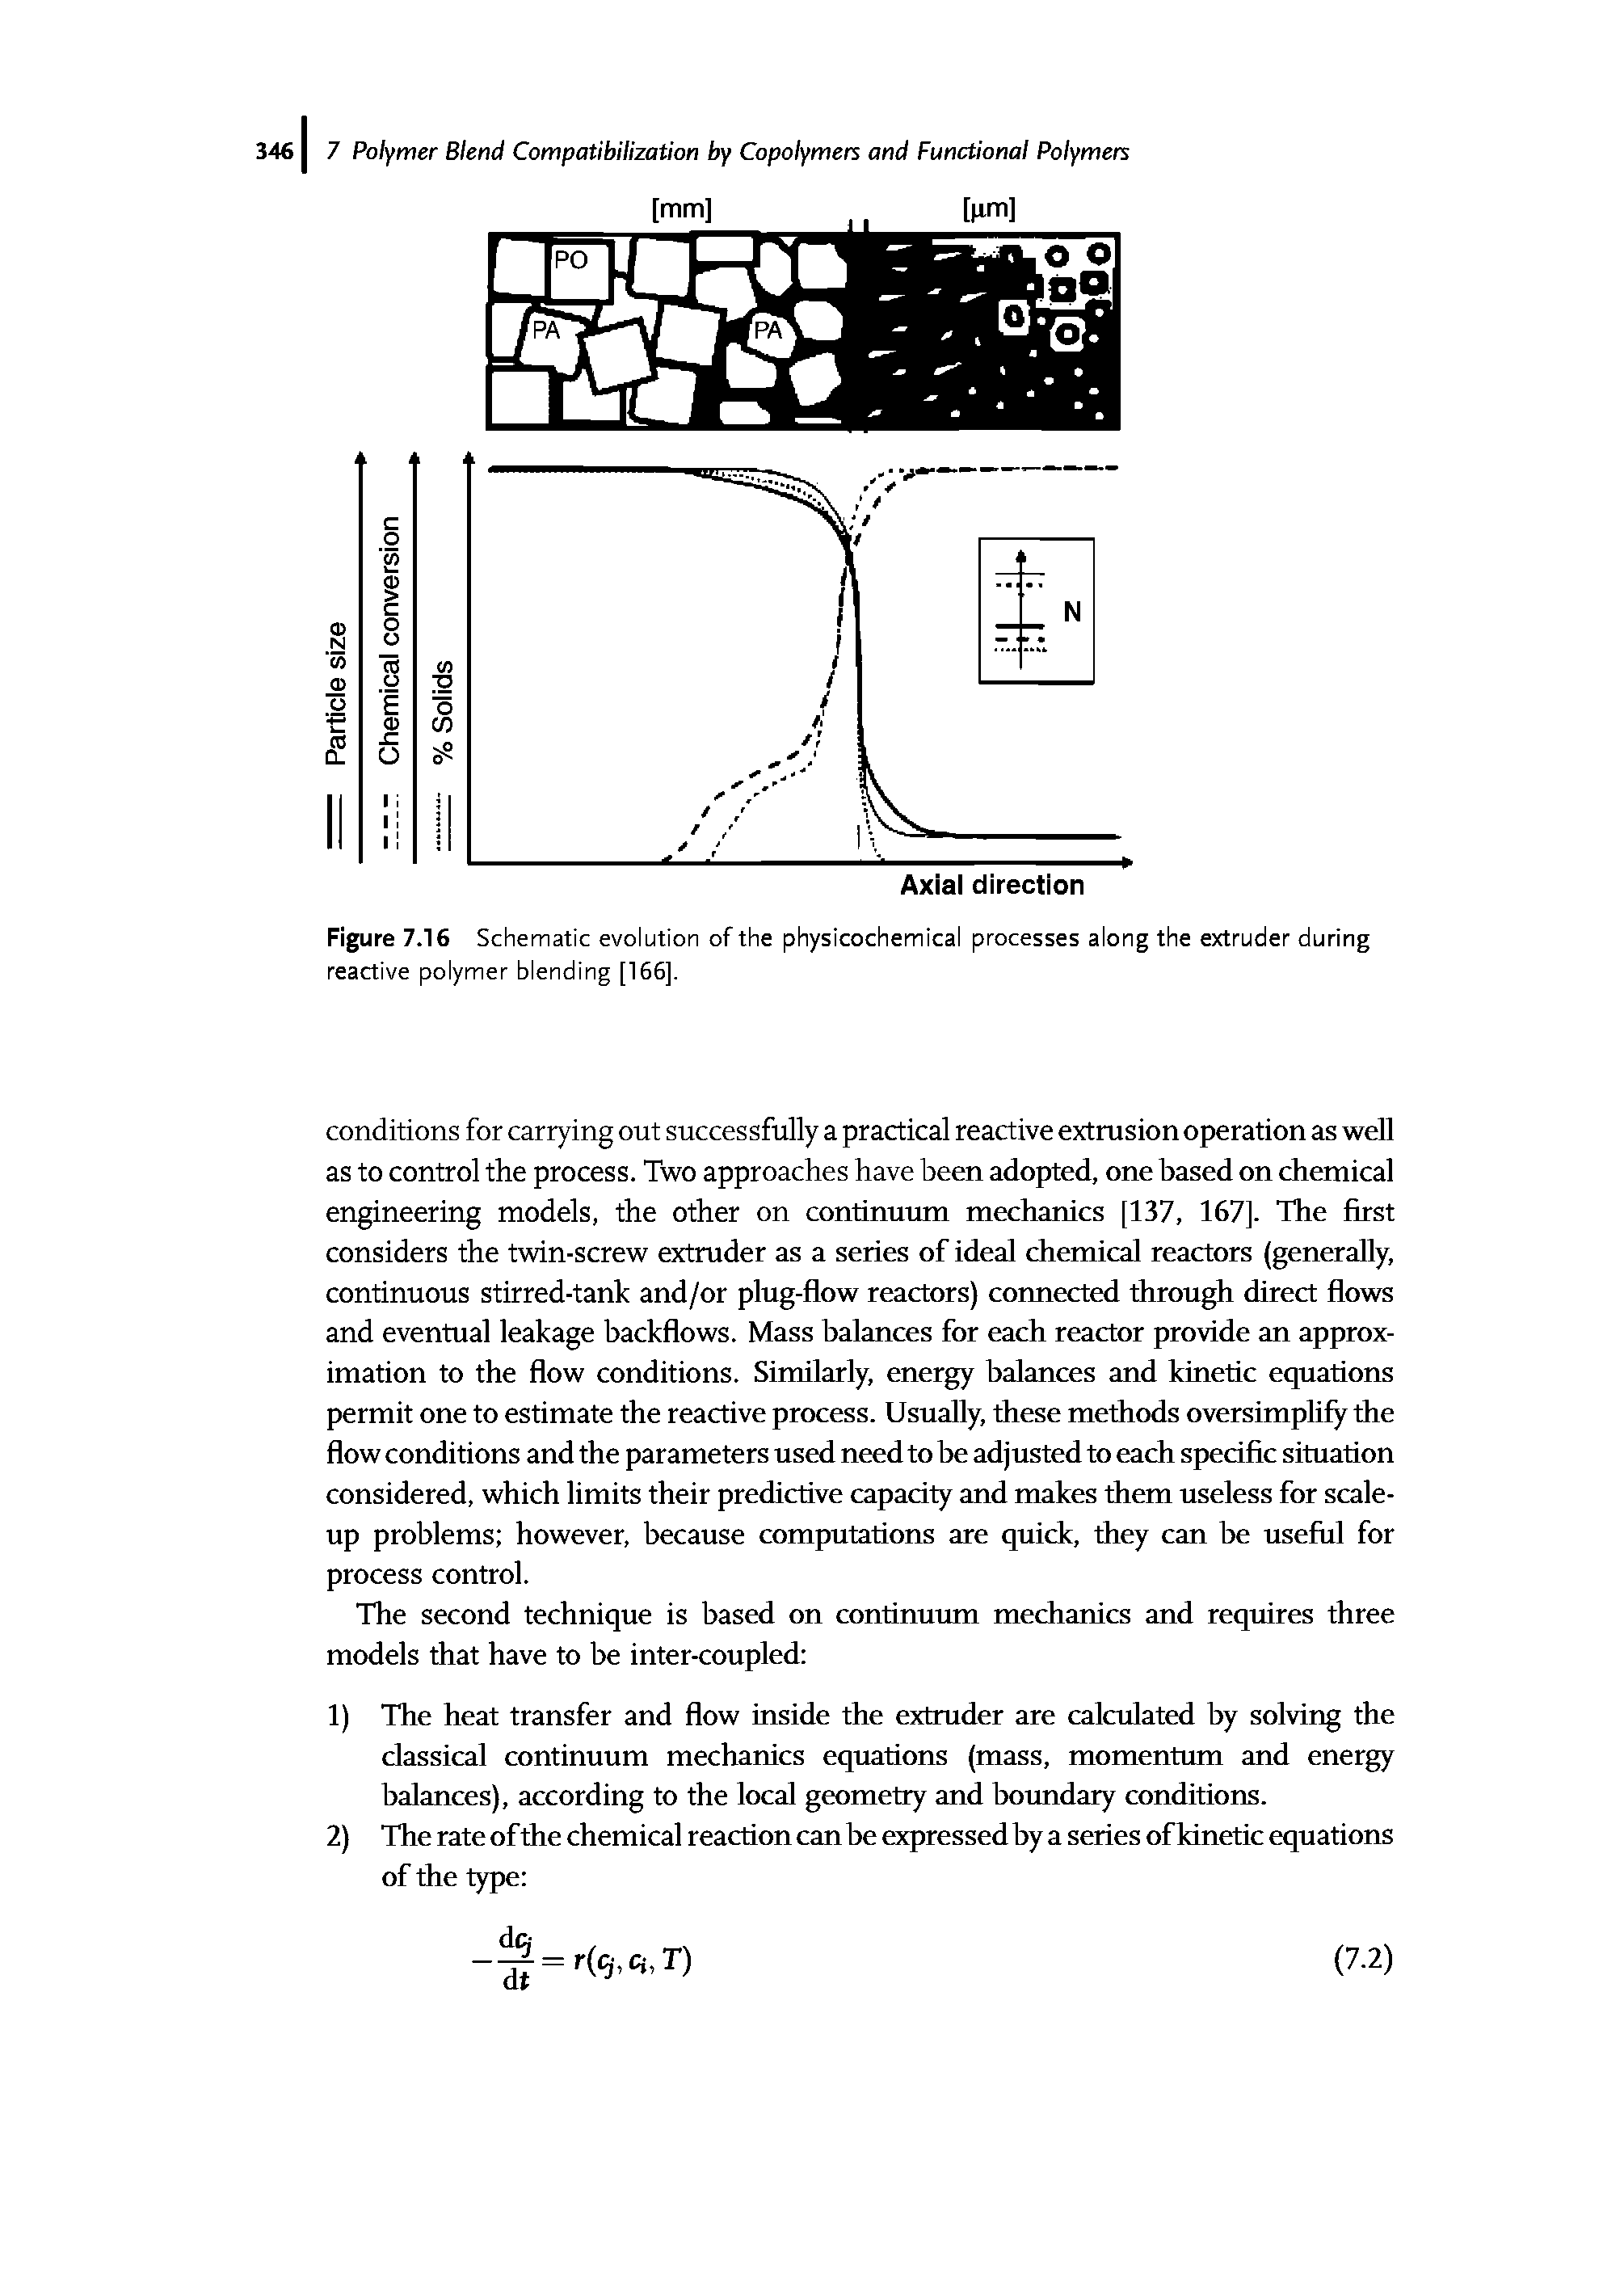 Figure 7.16 Schematic evolution of the physicochemical processes along the extruder during reactive polymer blending [166],...